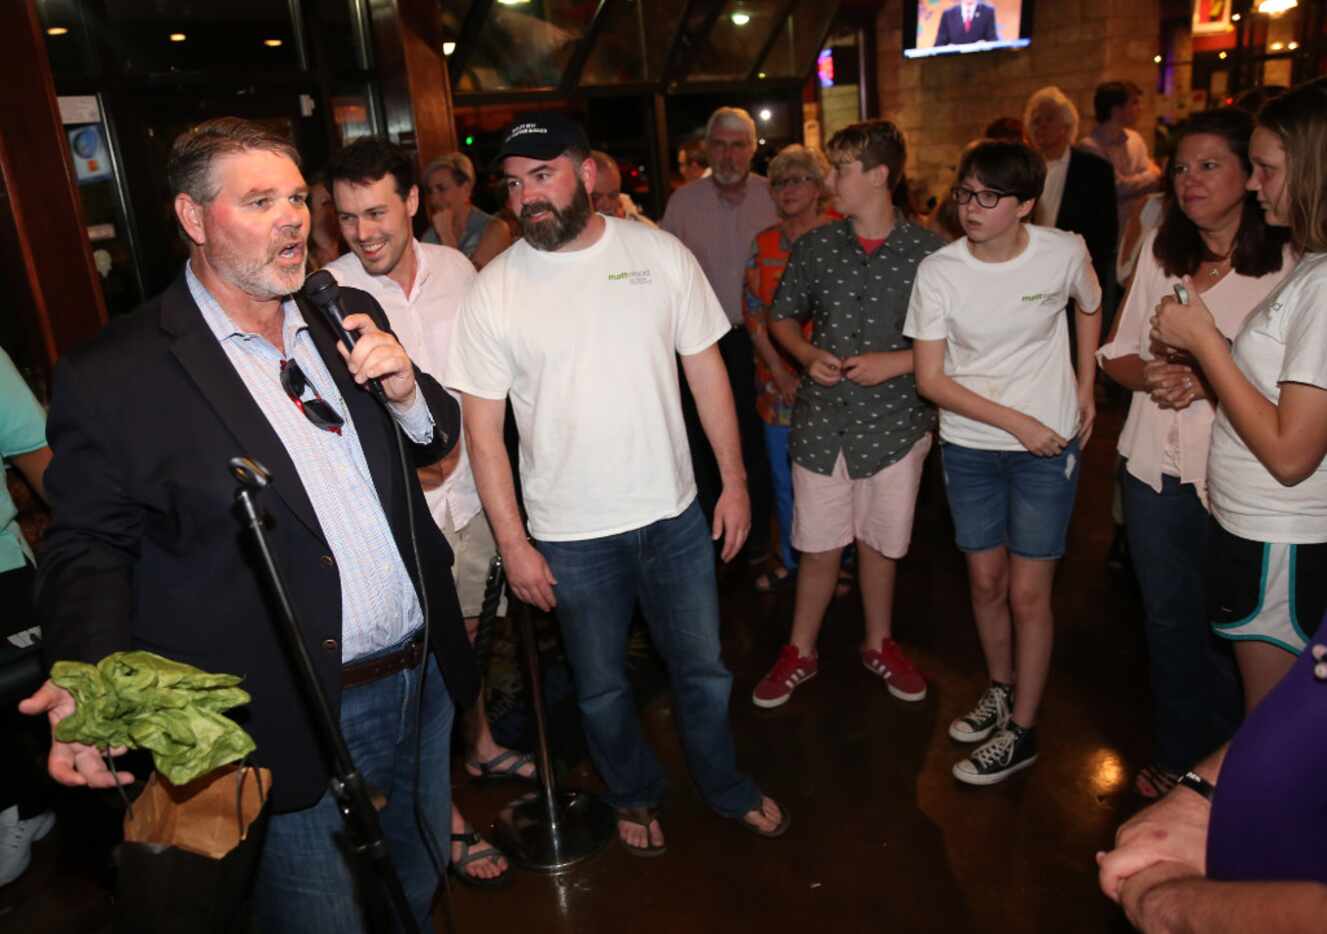 Dallas district 14 city council  candidate Matt Wood gives a concession speech to his...